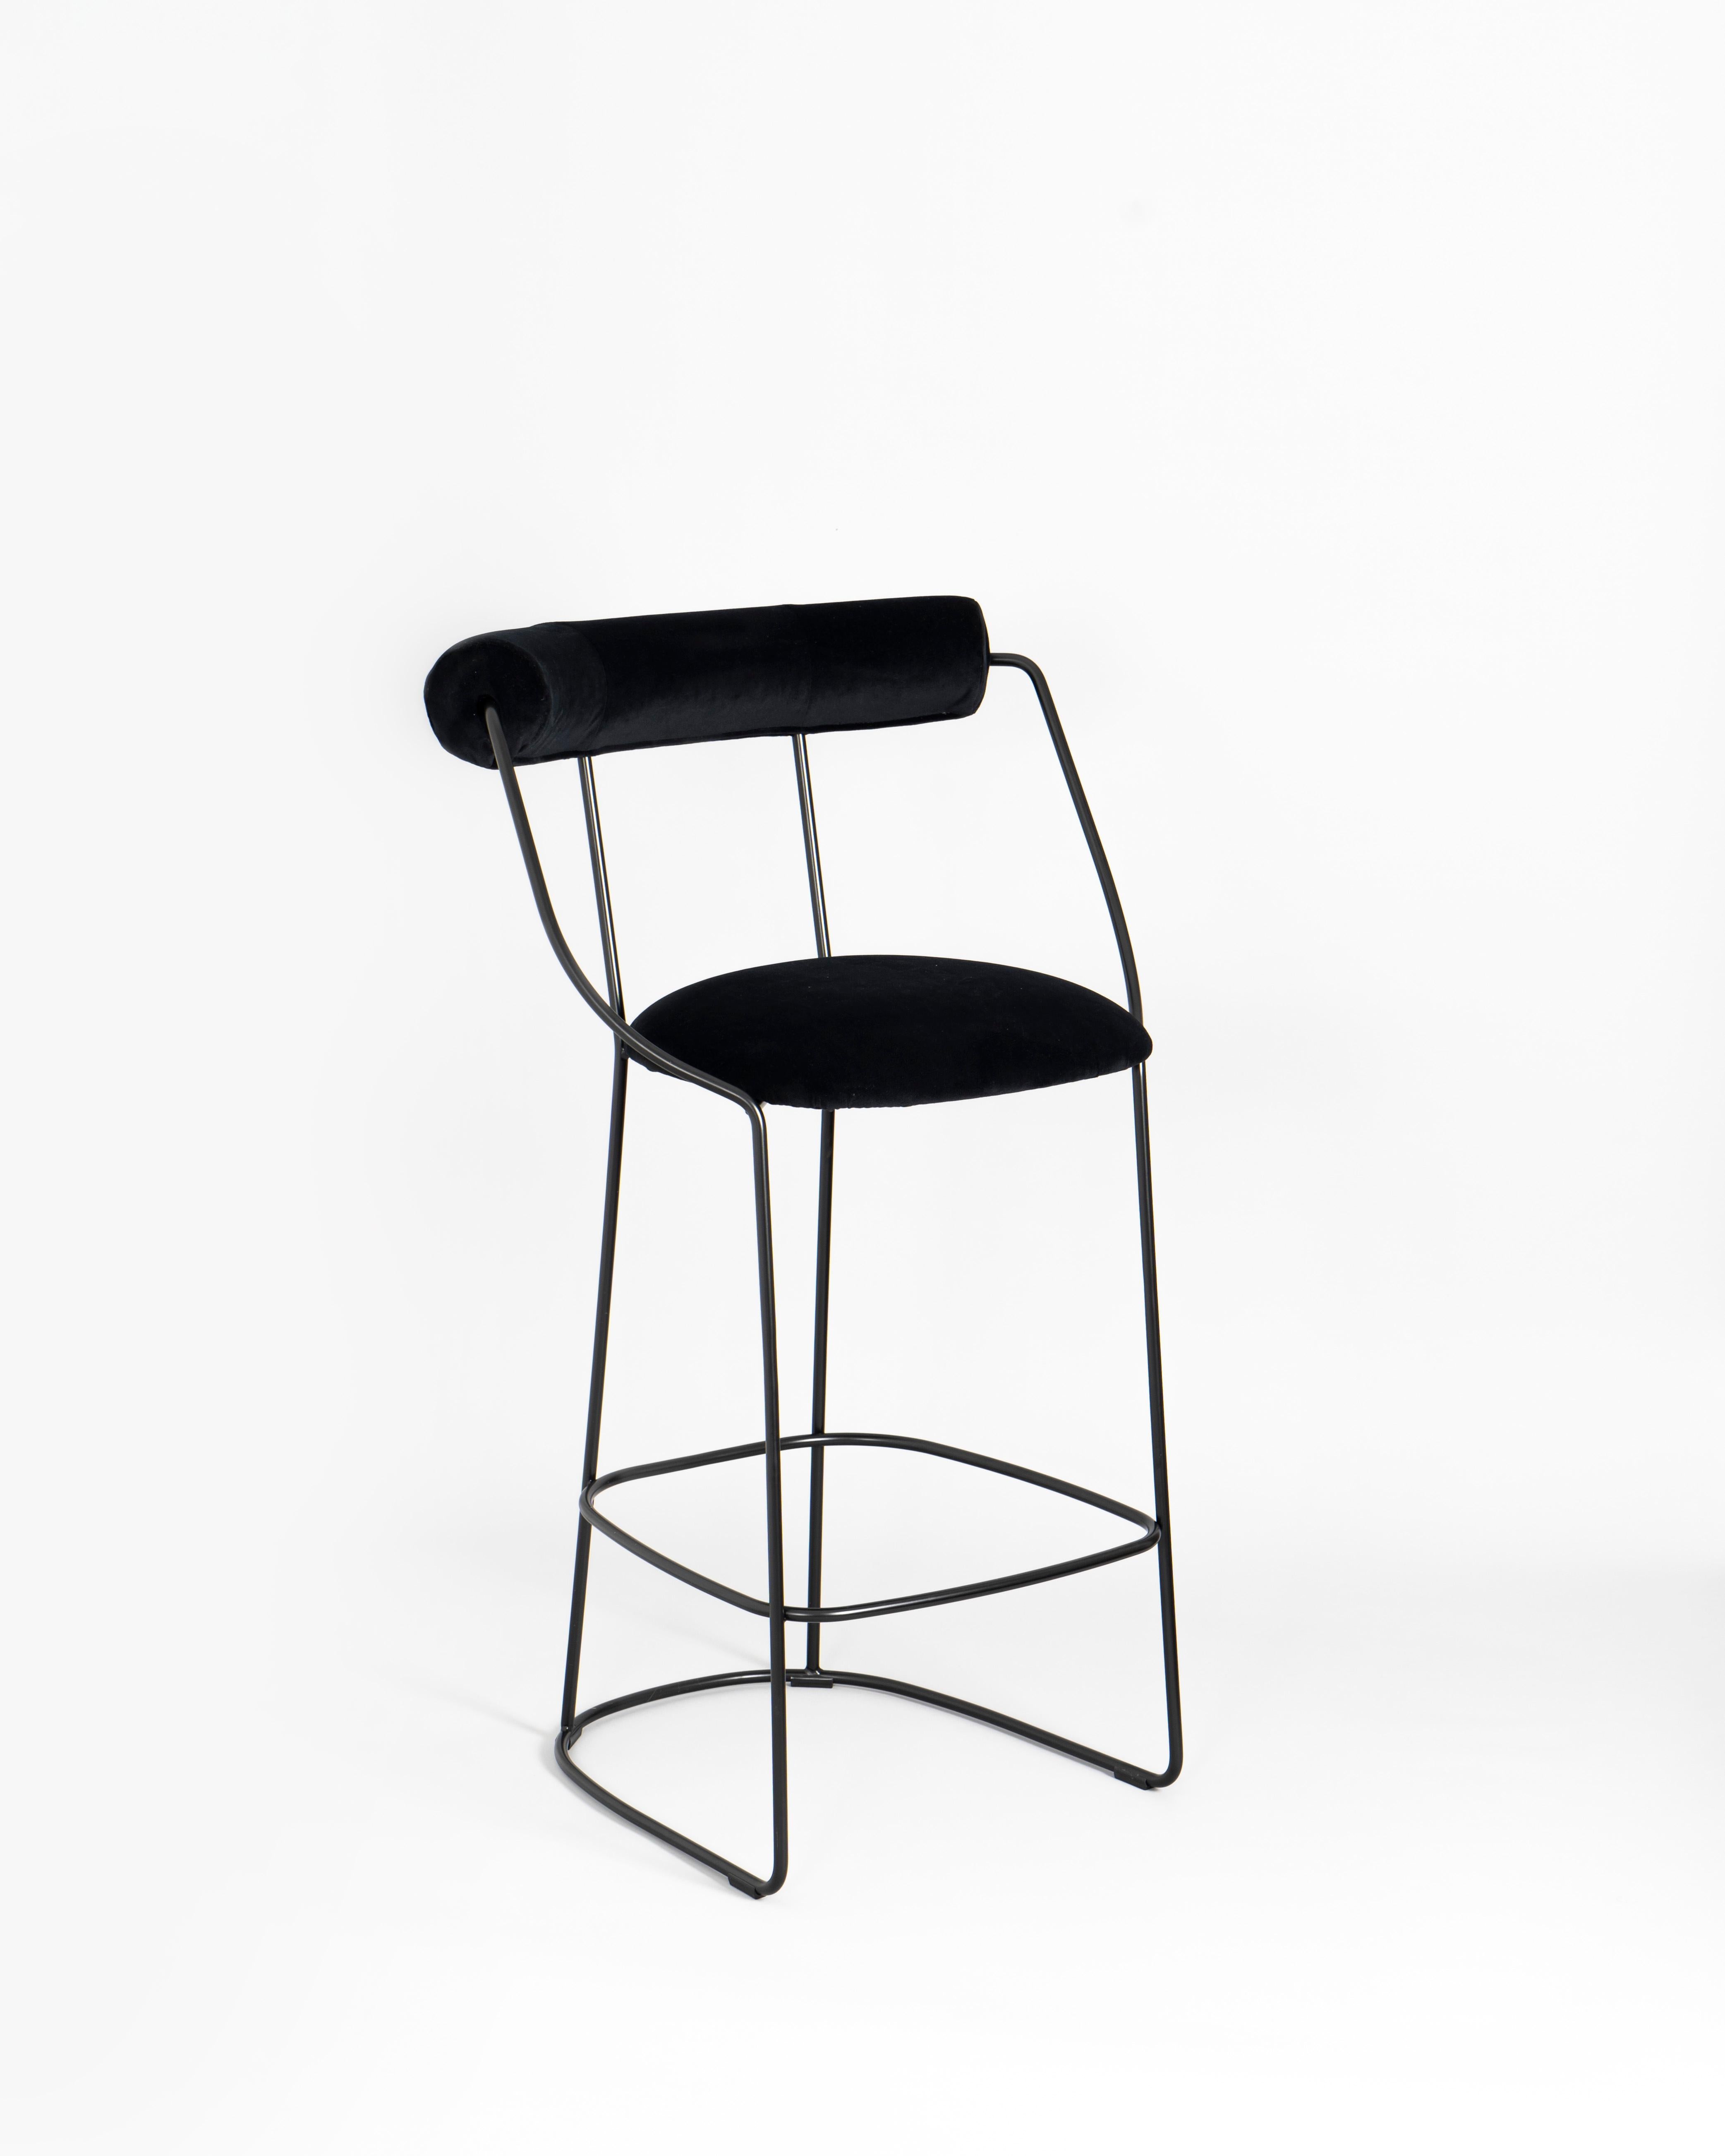 Fran Black Stool by LapiegaWD
Designed by Enrico Girotti.
Dimensions: D 51 x W 64 x H 110 cm.
Materials: Powder coated black metal and Bouclé or Velvet upholstery.

Available in different finishes and materials on request. Please contact us.

Based